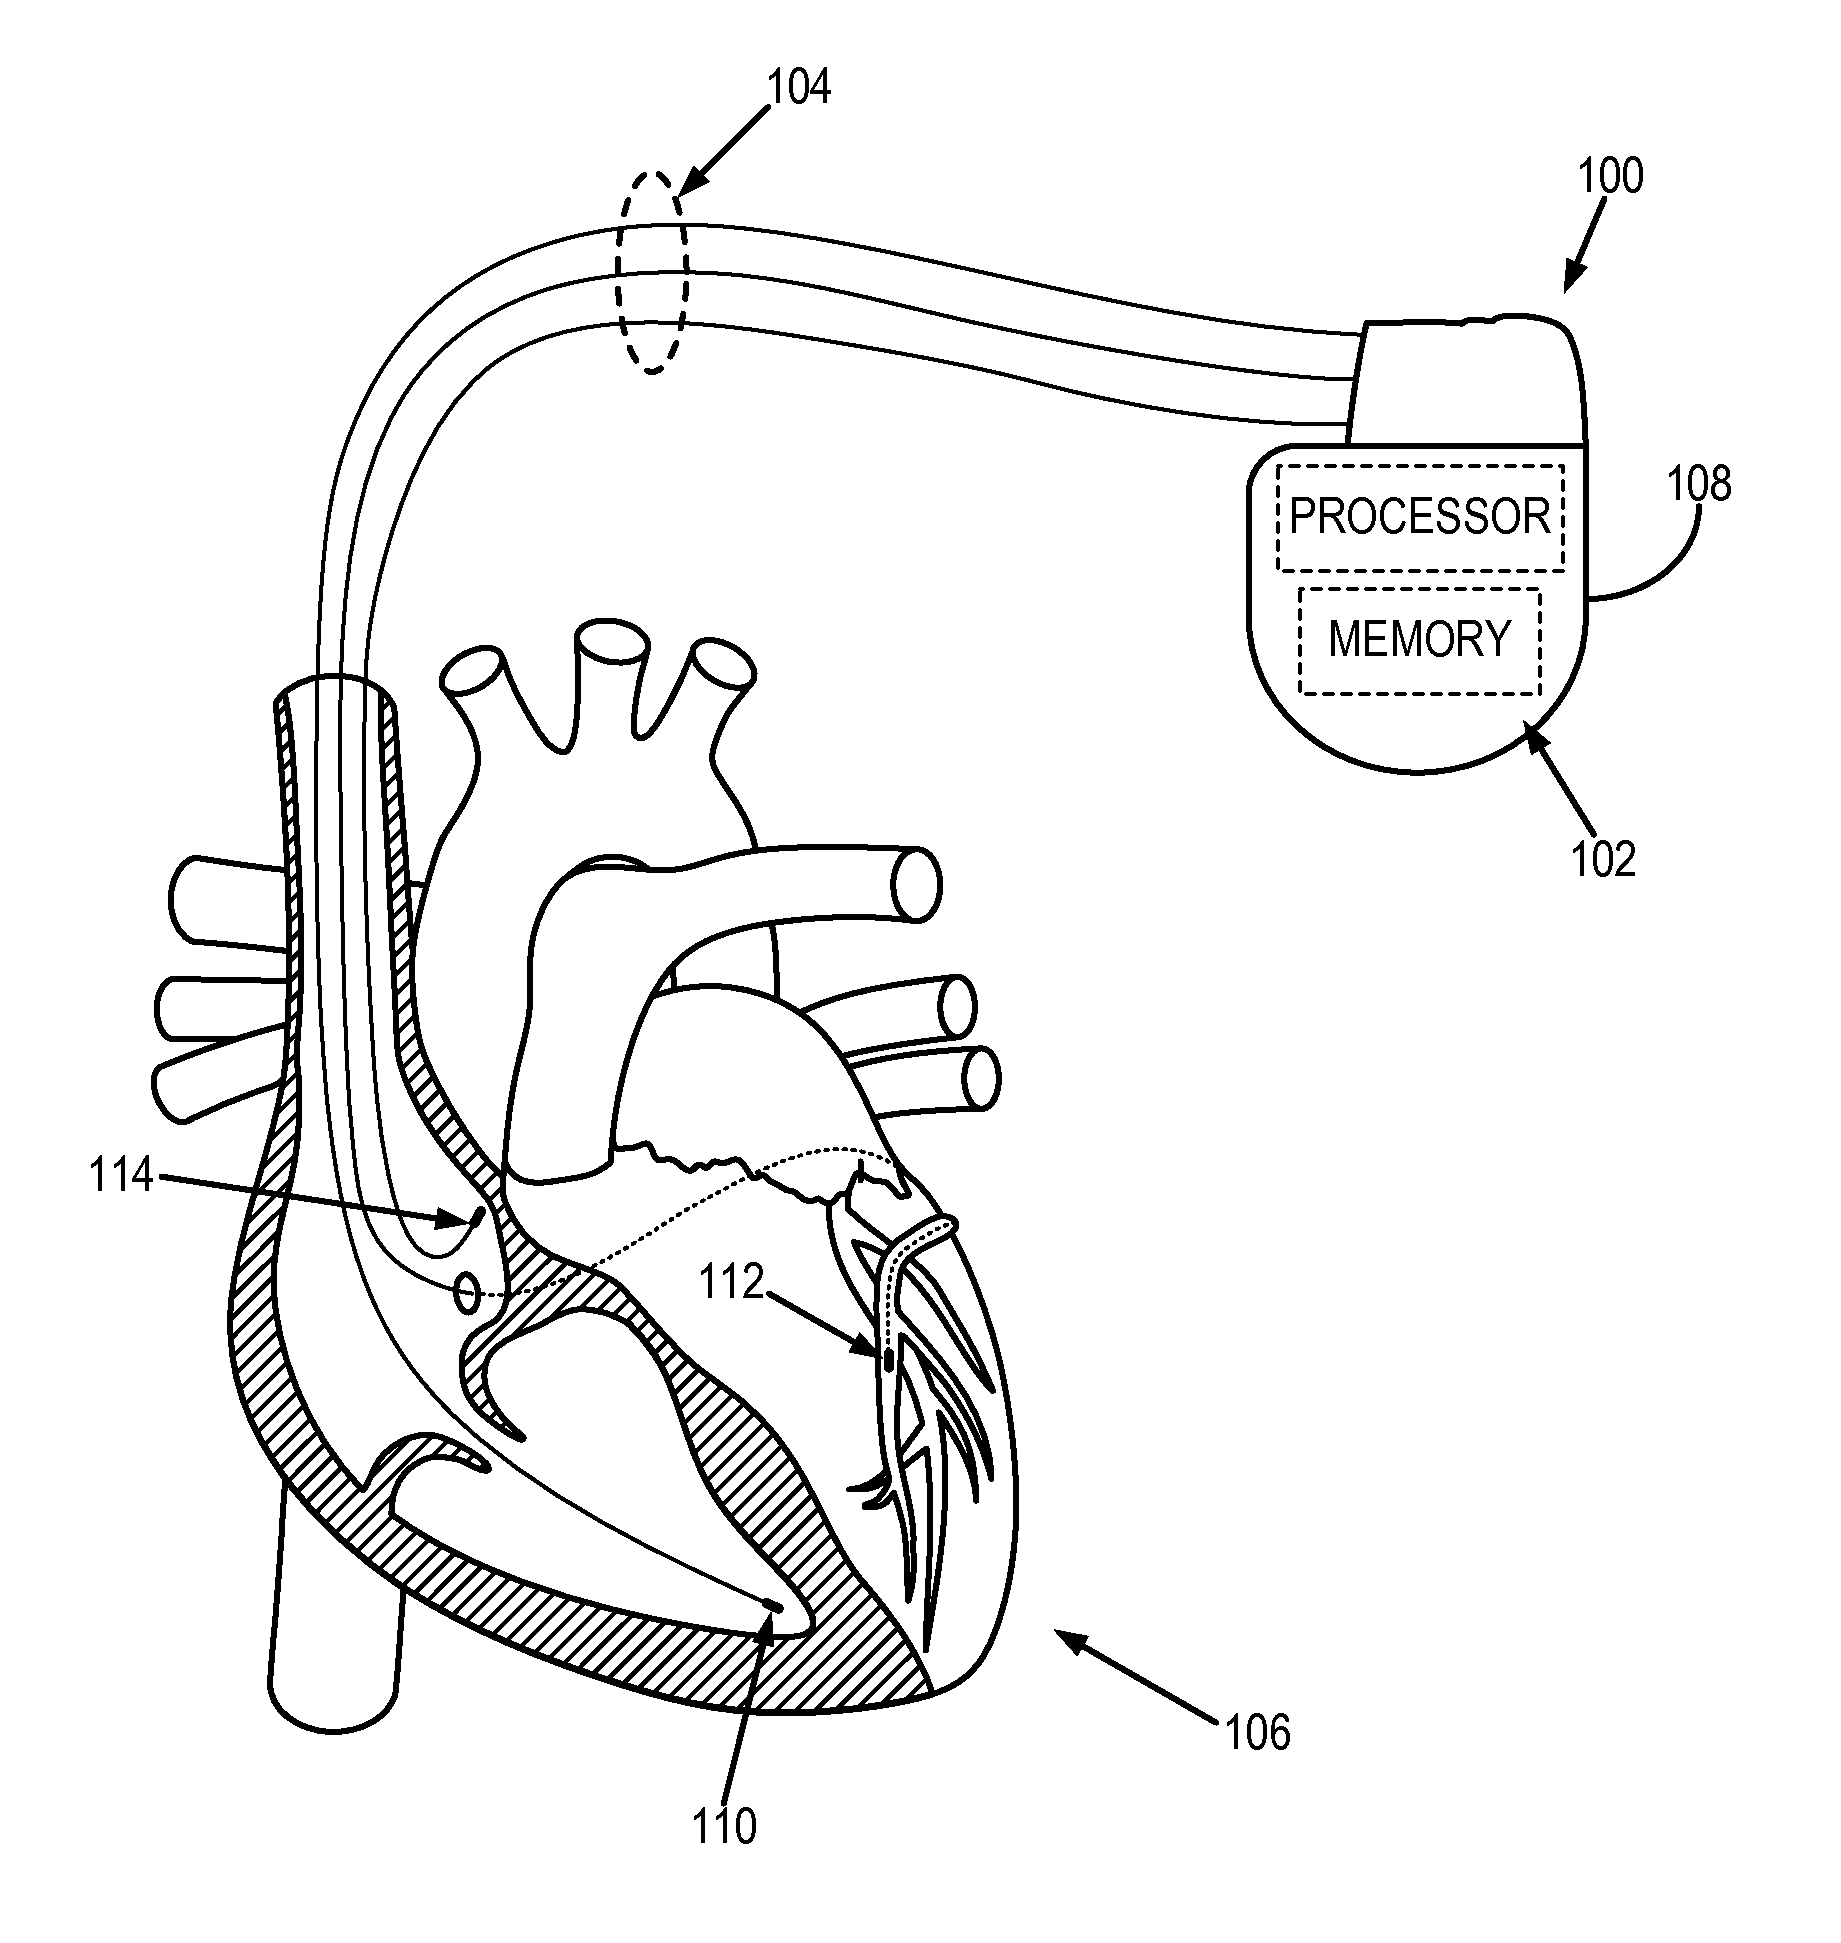 System and method for automated adjustment of cardiac resynchronization therapy control parameters